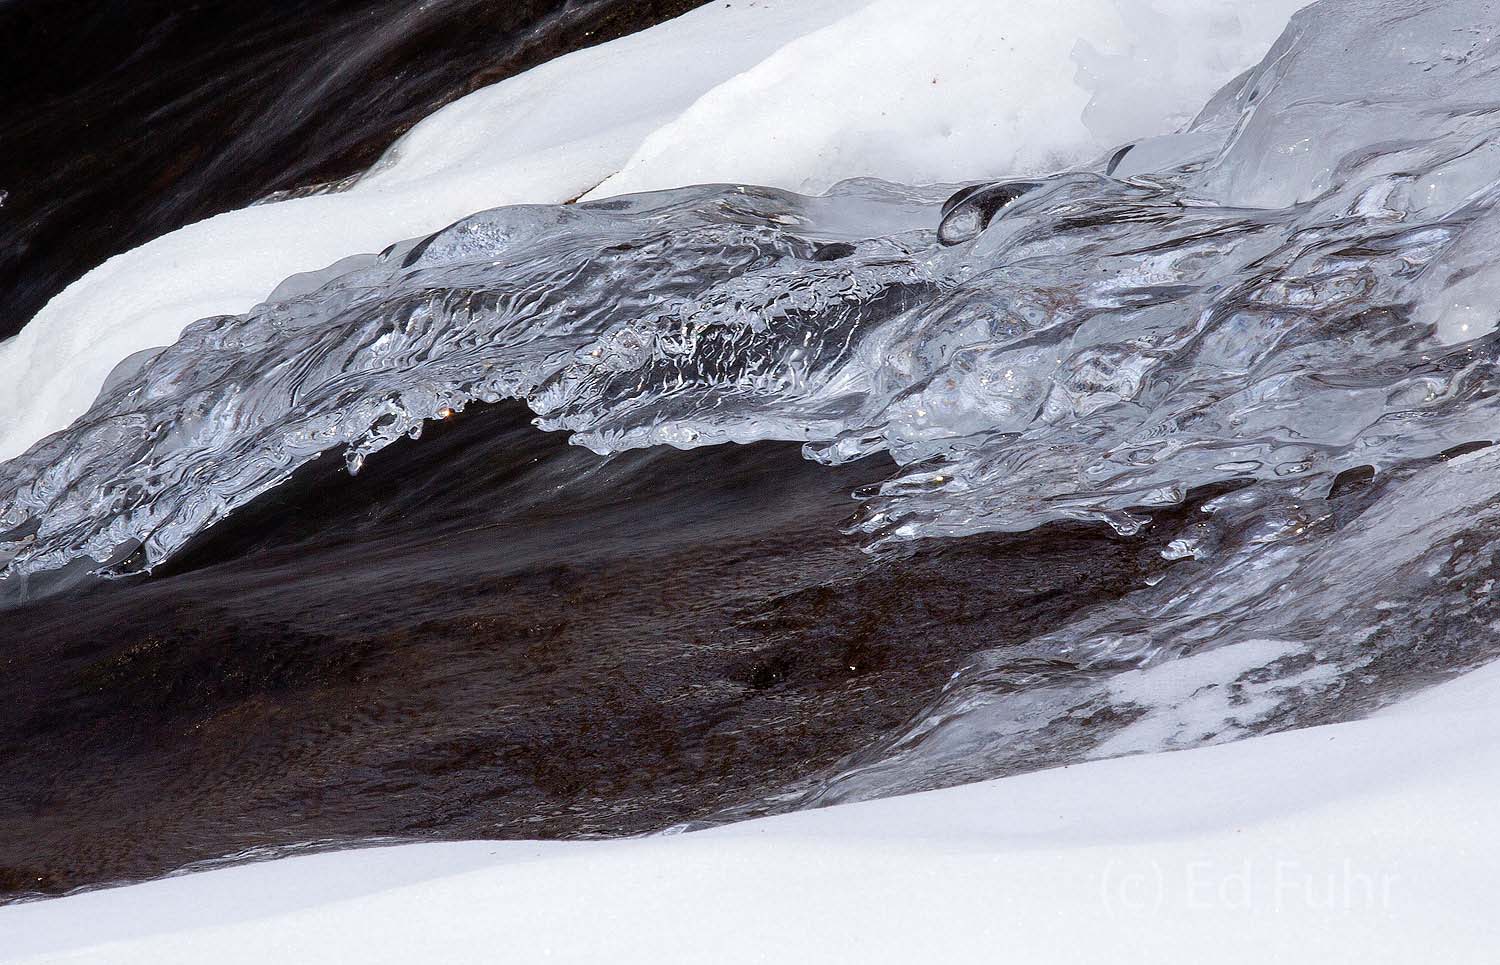 The subzero temperatures of the past week have created ice sculptures out of flowing cascades.